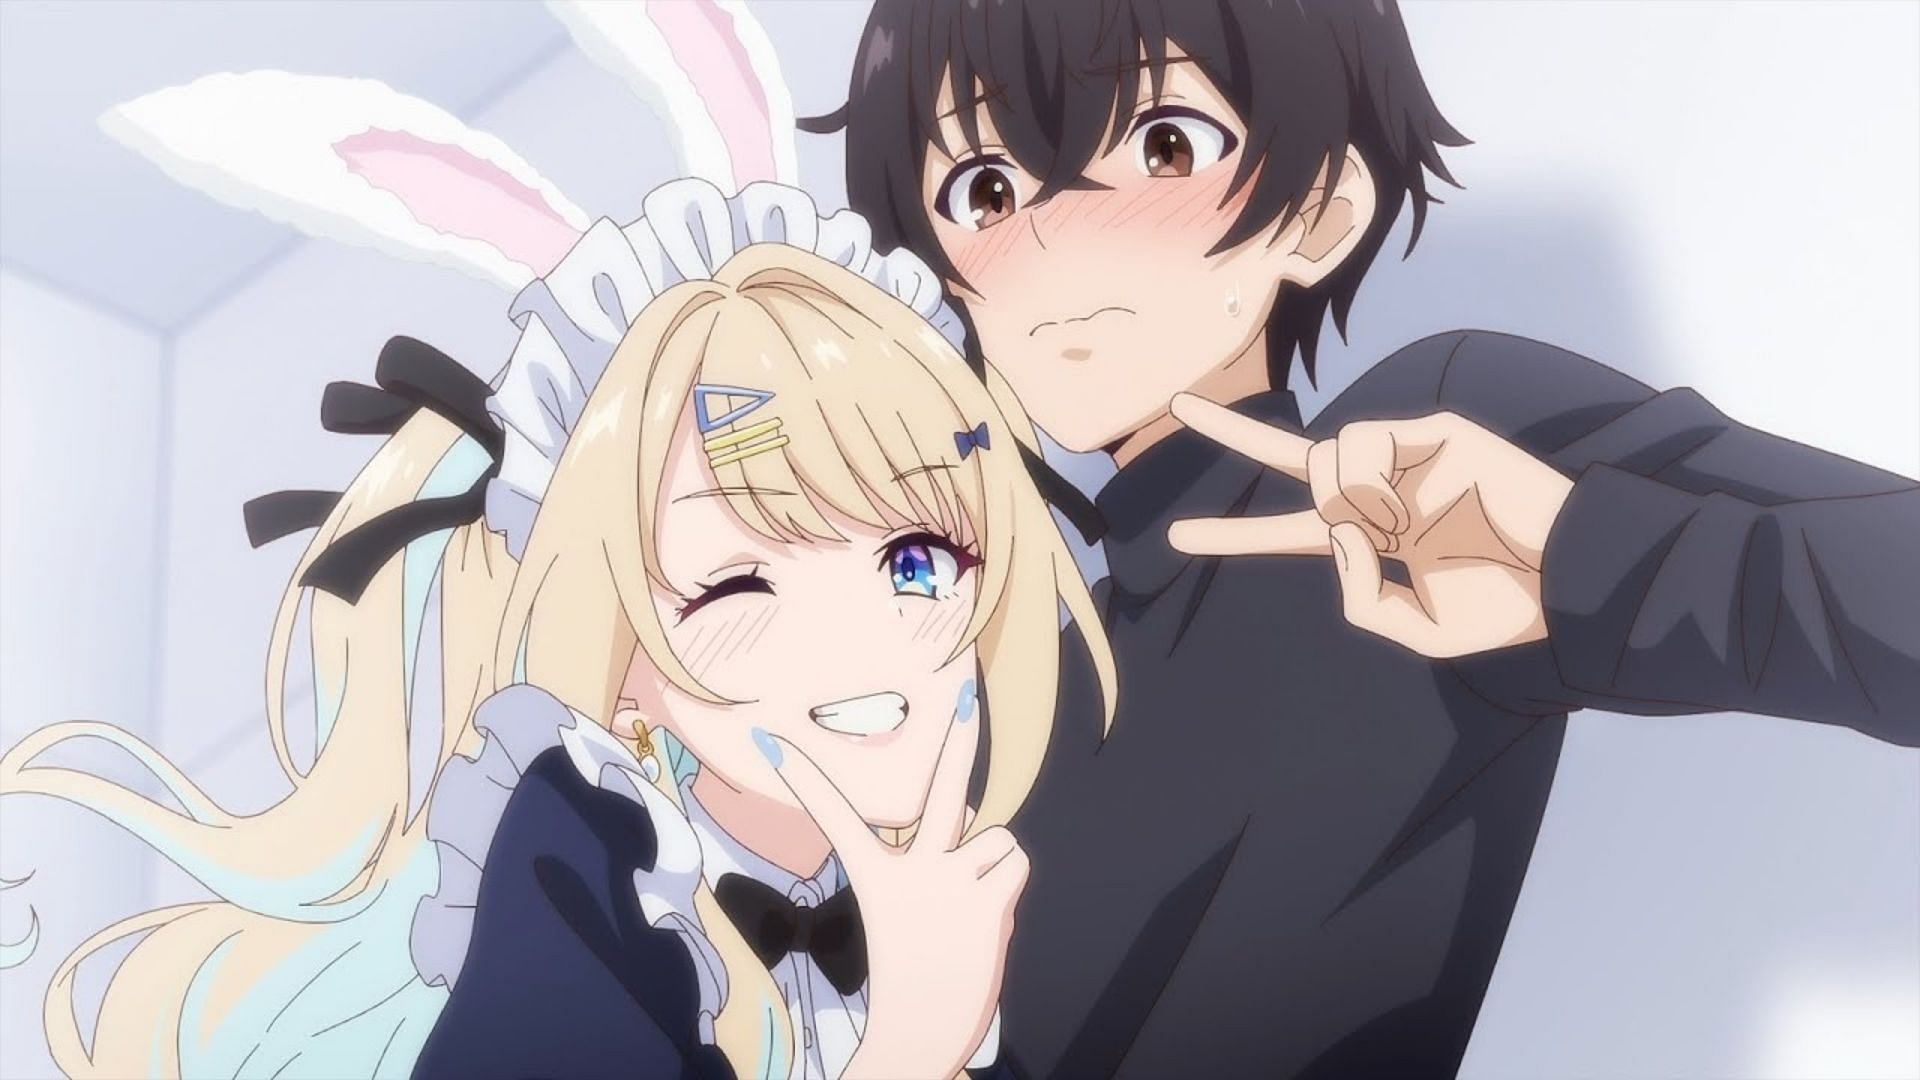 Will Our Dating Story anime have a season 2? Explored